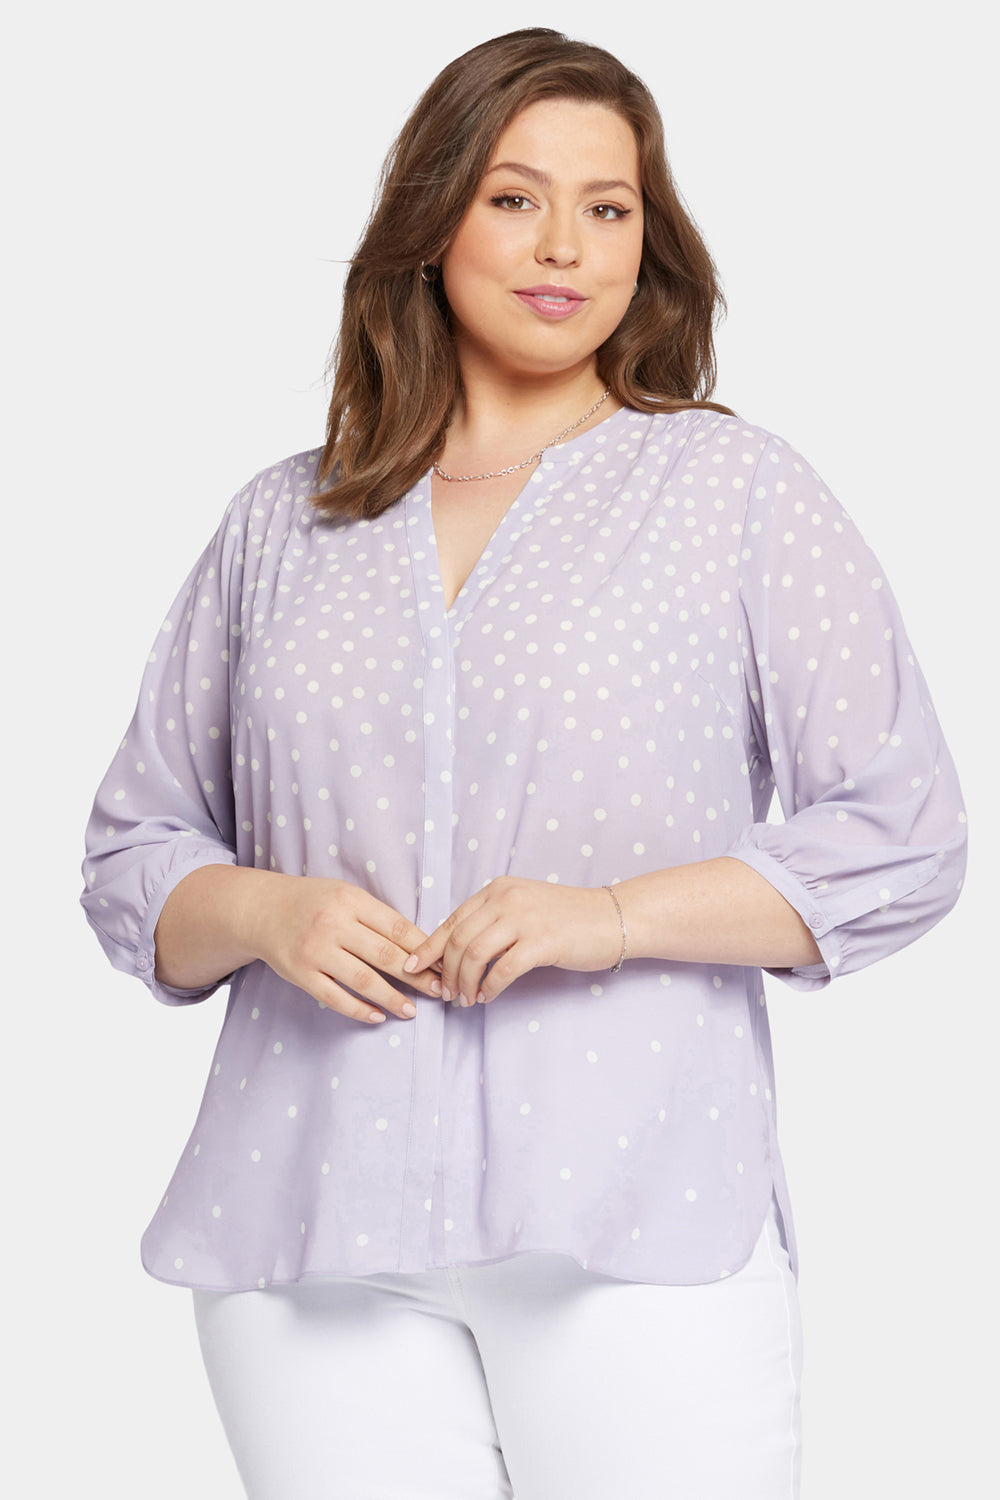 NYDJ Pintuck Blouse In Plus Size  - Fanciful Dots